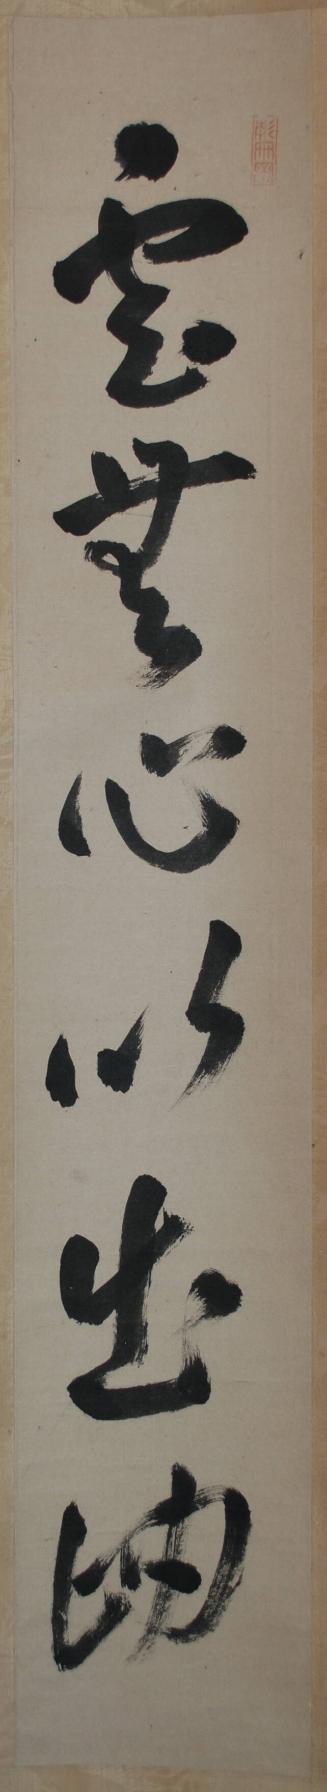 Lines from a Poem by T'ao Yüan-ming (365-427)